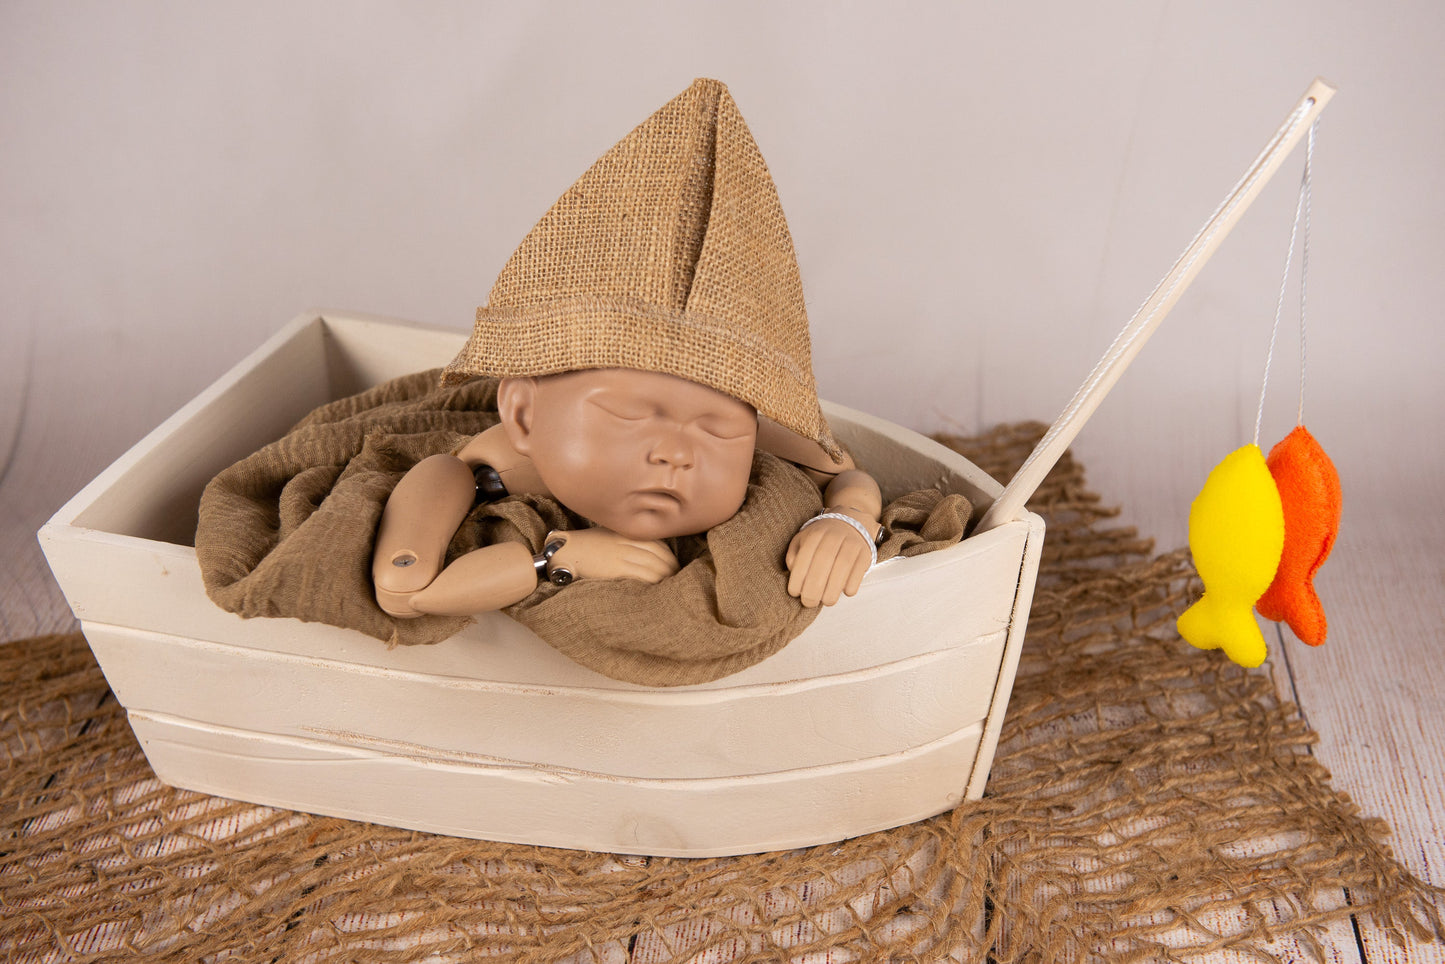 A faux fishing rod with orange and yellow felt fish on a rustic net, ideal for newborn photography prop setups.